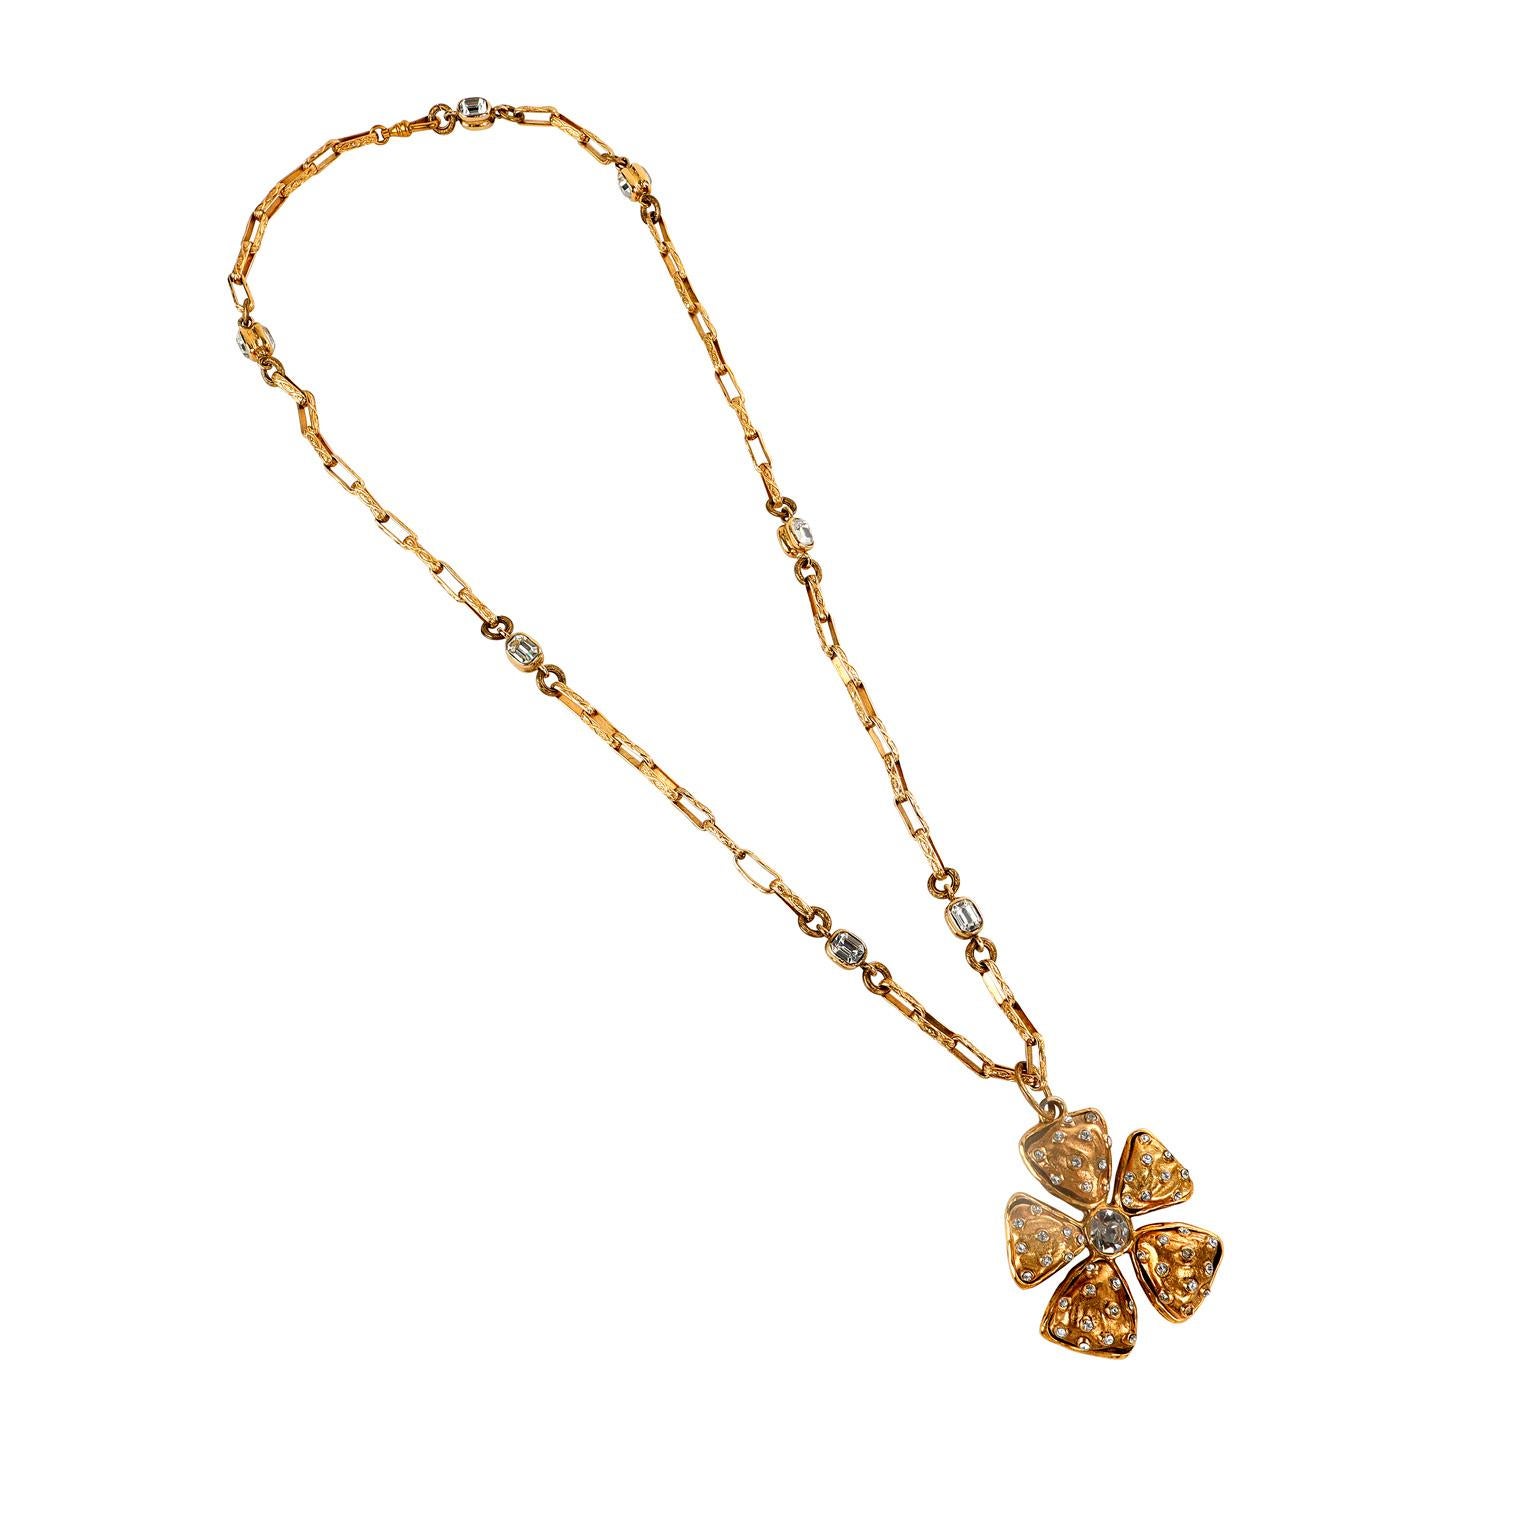 This authentic Chanel Crystal and Gold Camellia Necklace is in pristine vintage condition from the late 70’s- early 80’s era. 24 karat gold plated large camellia flower is adorned with crystals on the petals and in the center.  Dangles delicately